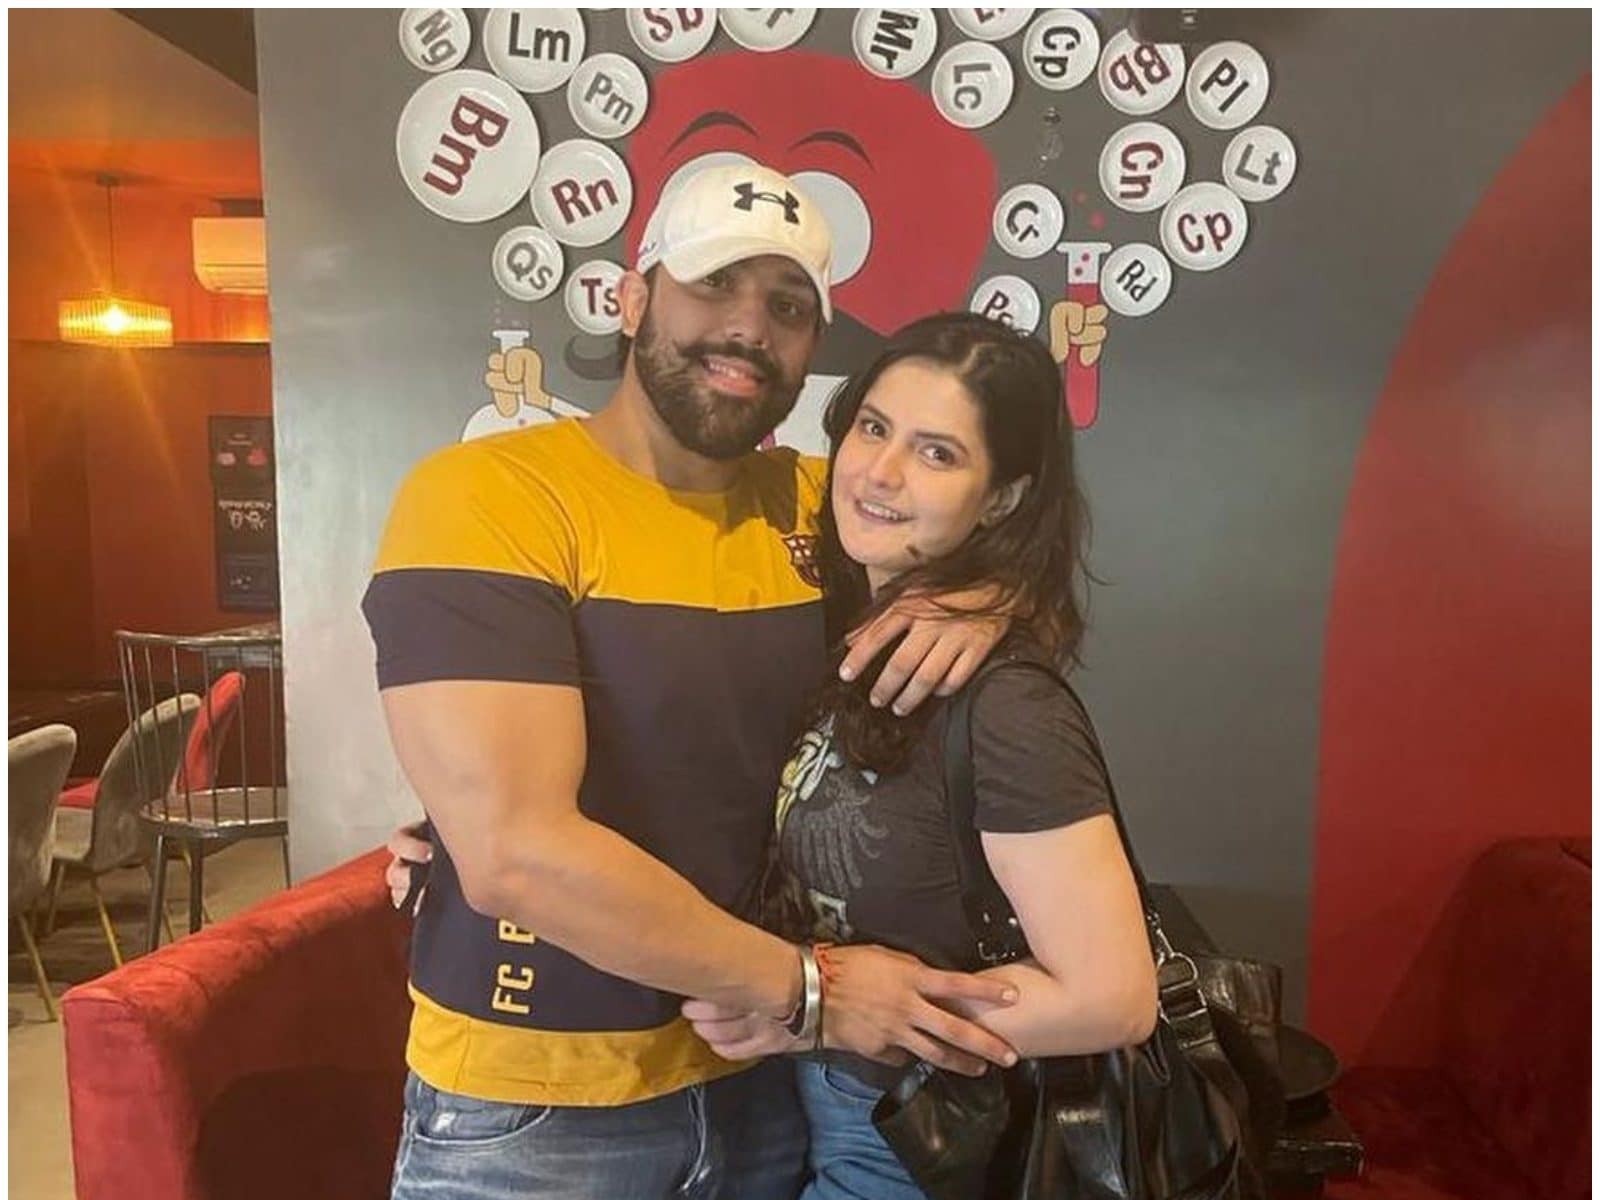 Zareen Khan Pornsex - Zareen Khan Opens up on Relationship with Bigg Boss 12 Actor Shivashish  Mishra: Let's See Where it Goes